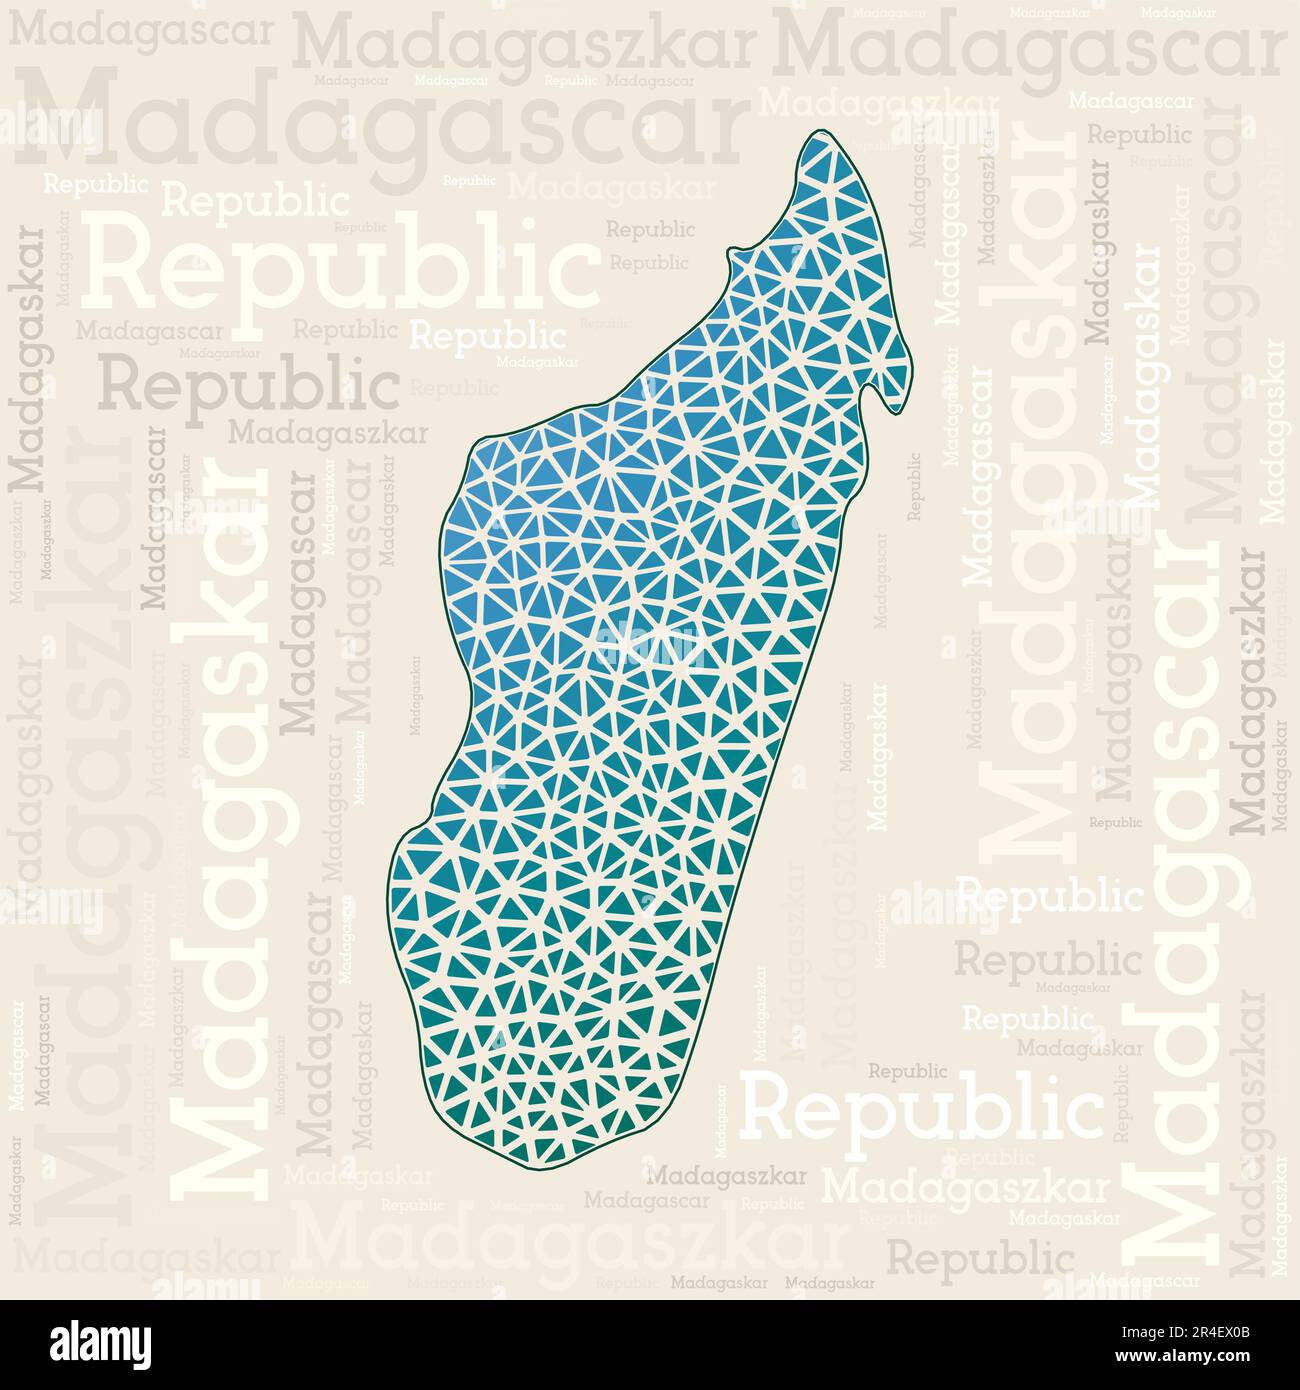 MADAGASCAR map design. Country names in different languages and map shape with geometric low poly triangles. Charming vector illustration of Madagasca Stock Vector